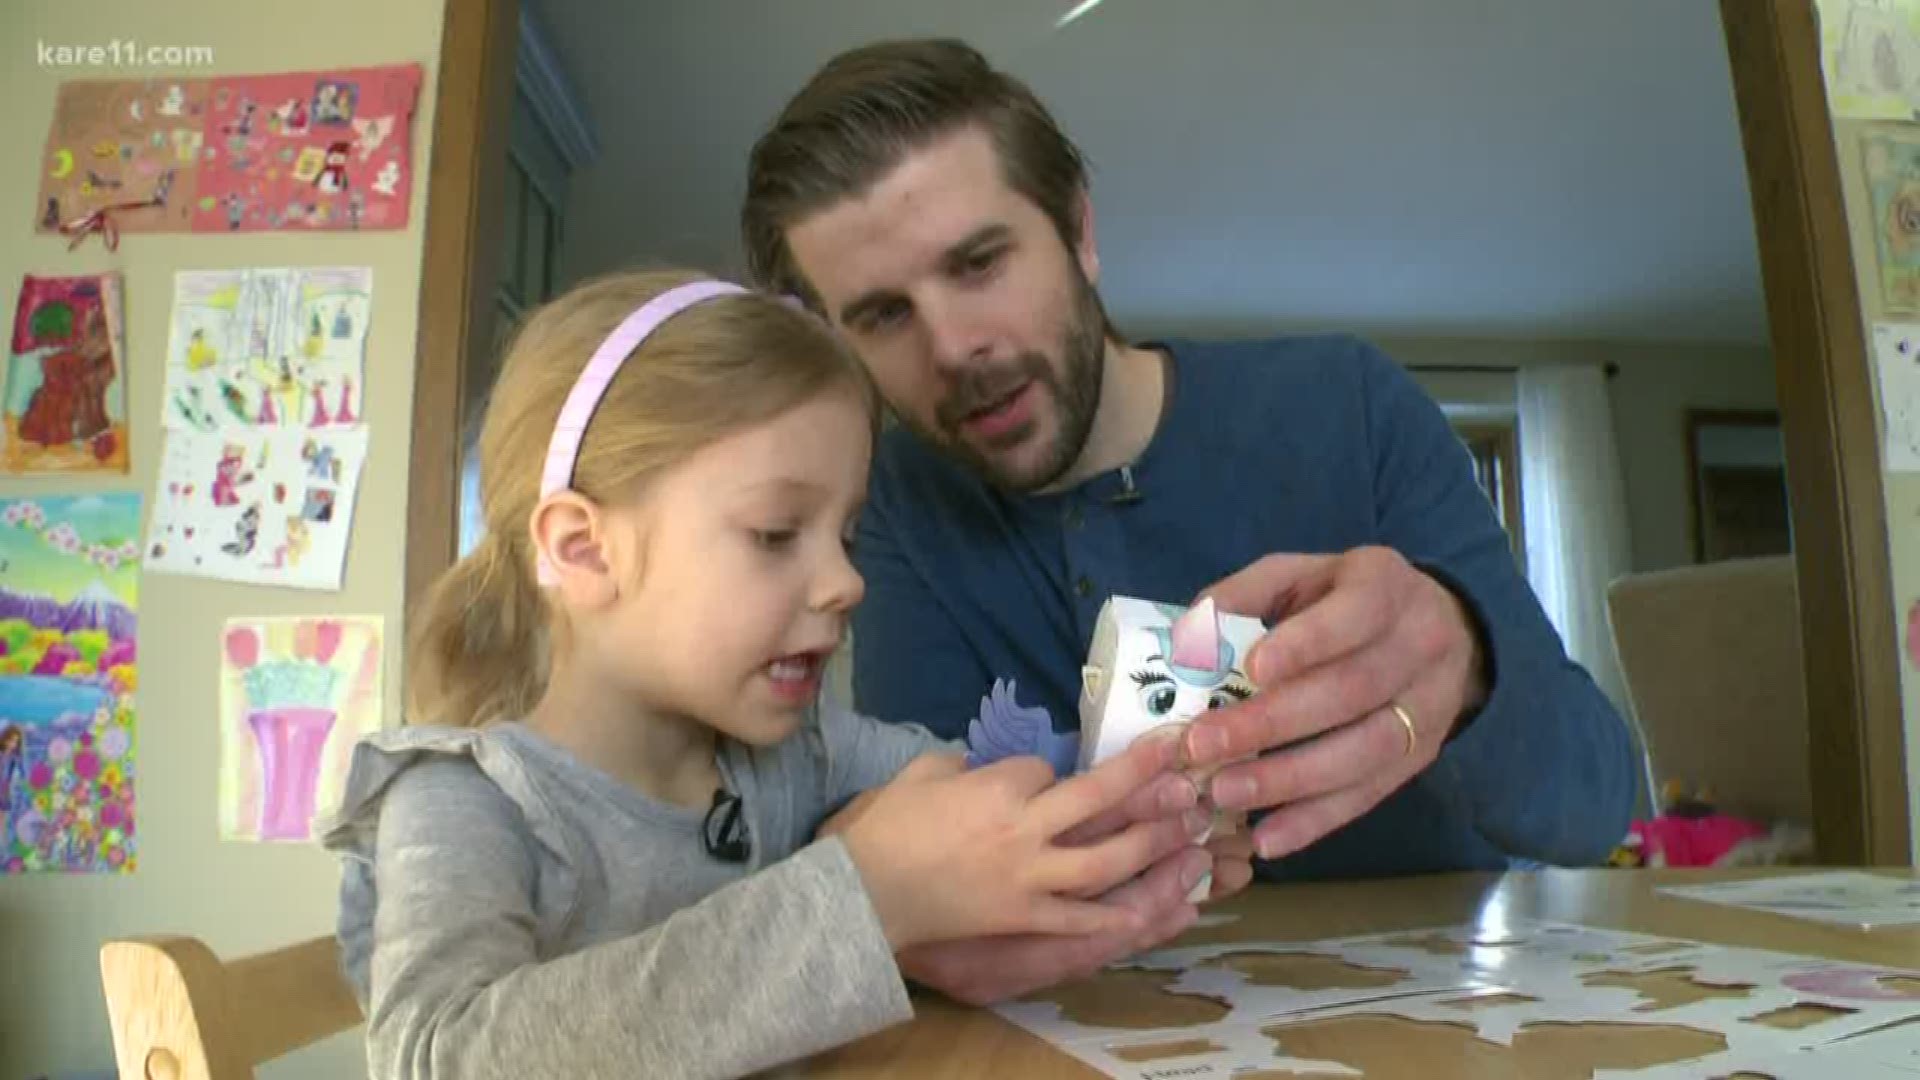 With Christmas fast approaching, a Minnesota company hopes you'll consider their kid-friendly stocking stuffer.